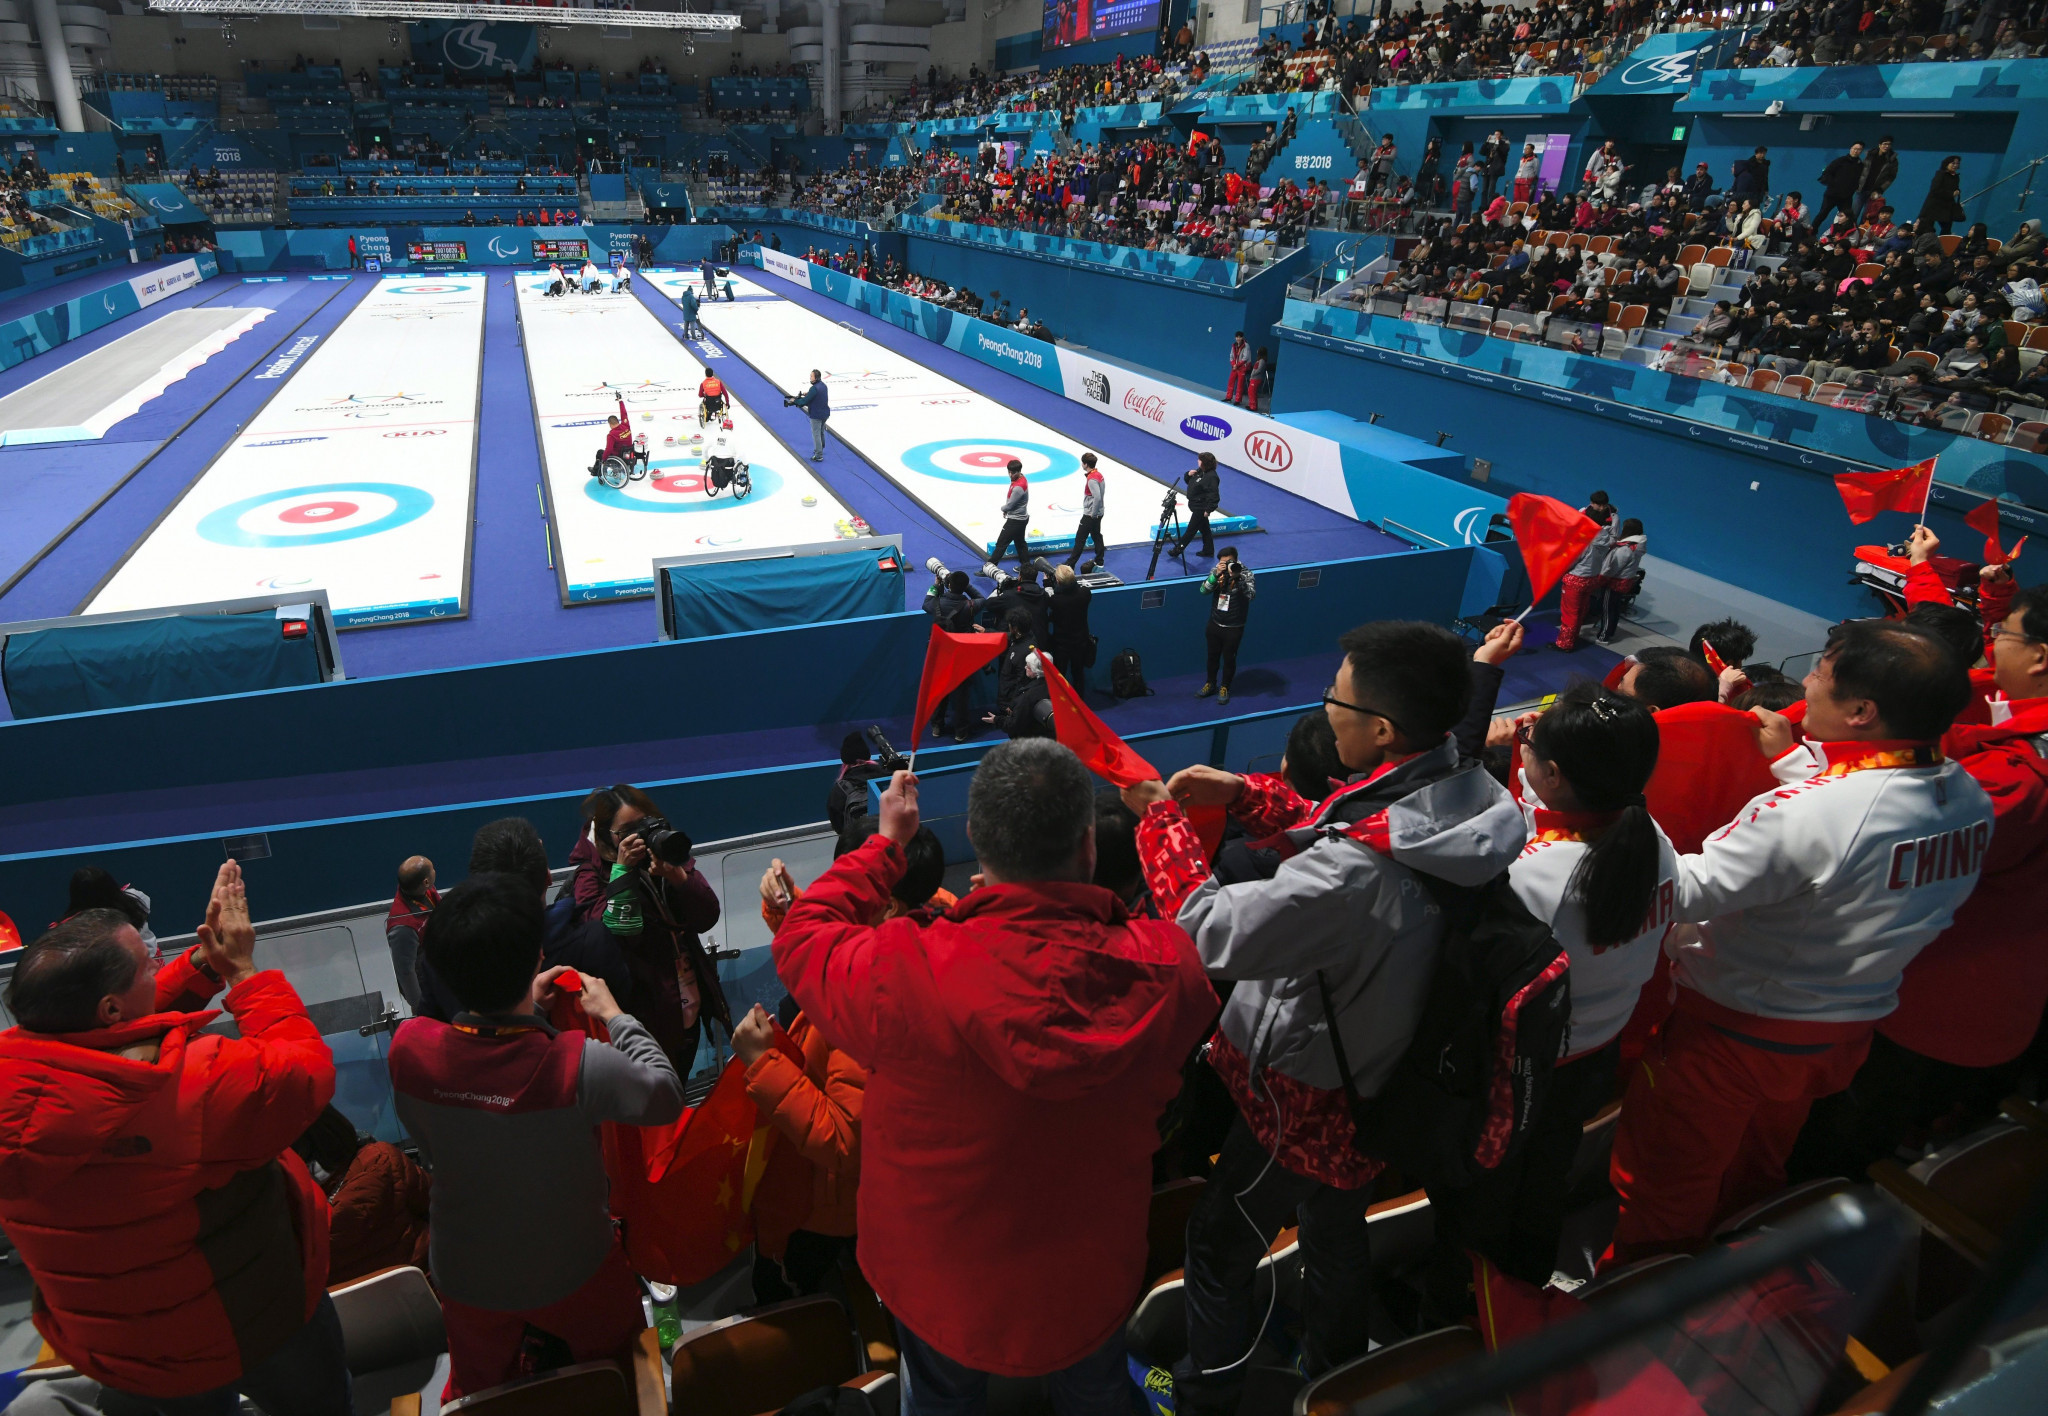 The 2018 Pacific-Asia Curling Championships will take place at the Gangneung Curling Centre, the venue used at the 2018 PyeongChang Olympic and Paralympic Winter Games ©Getty Images